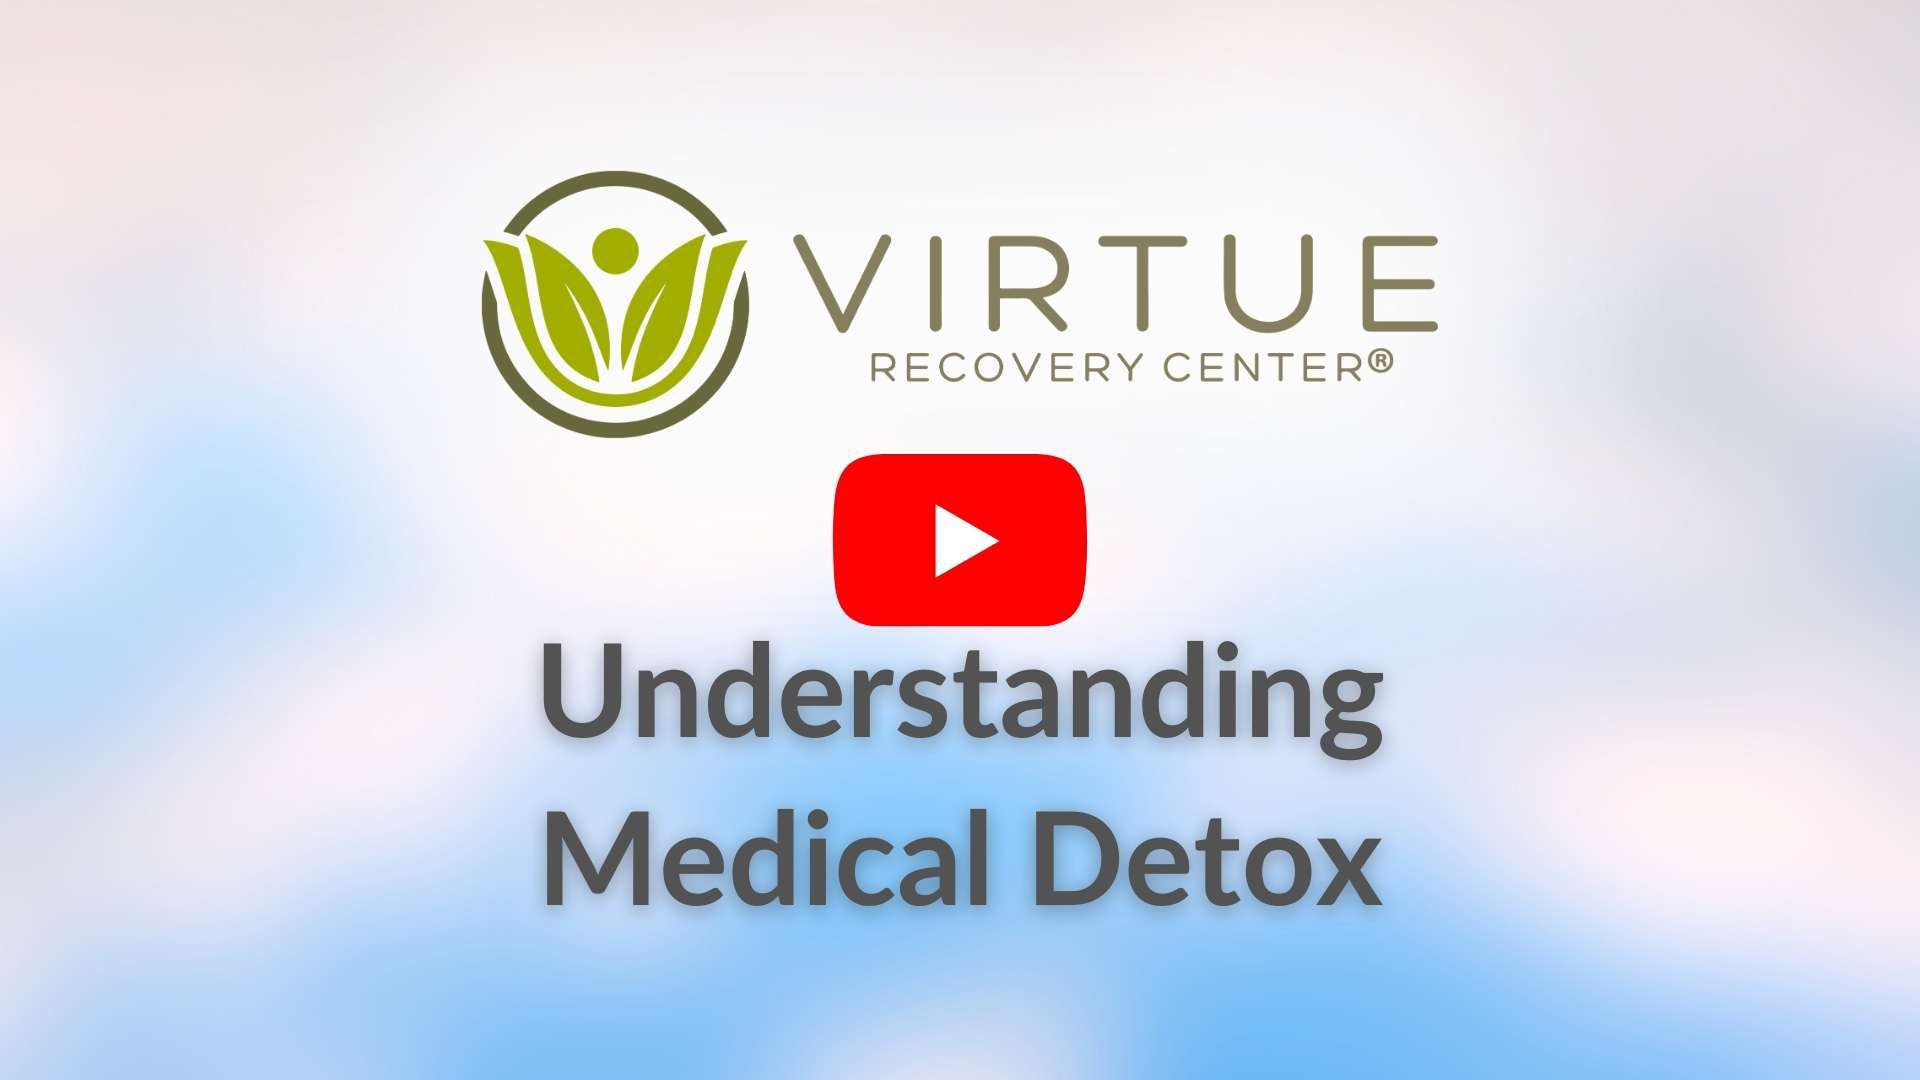   Understanding Medical Detox at Virtue Recovery Center